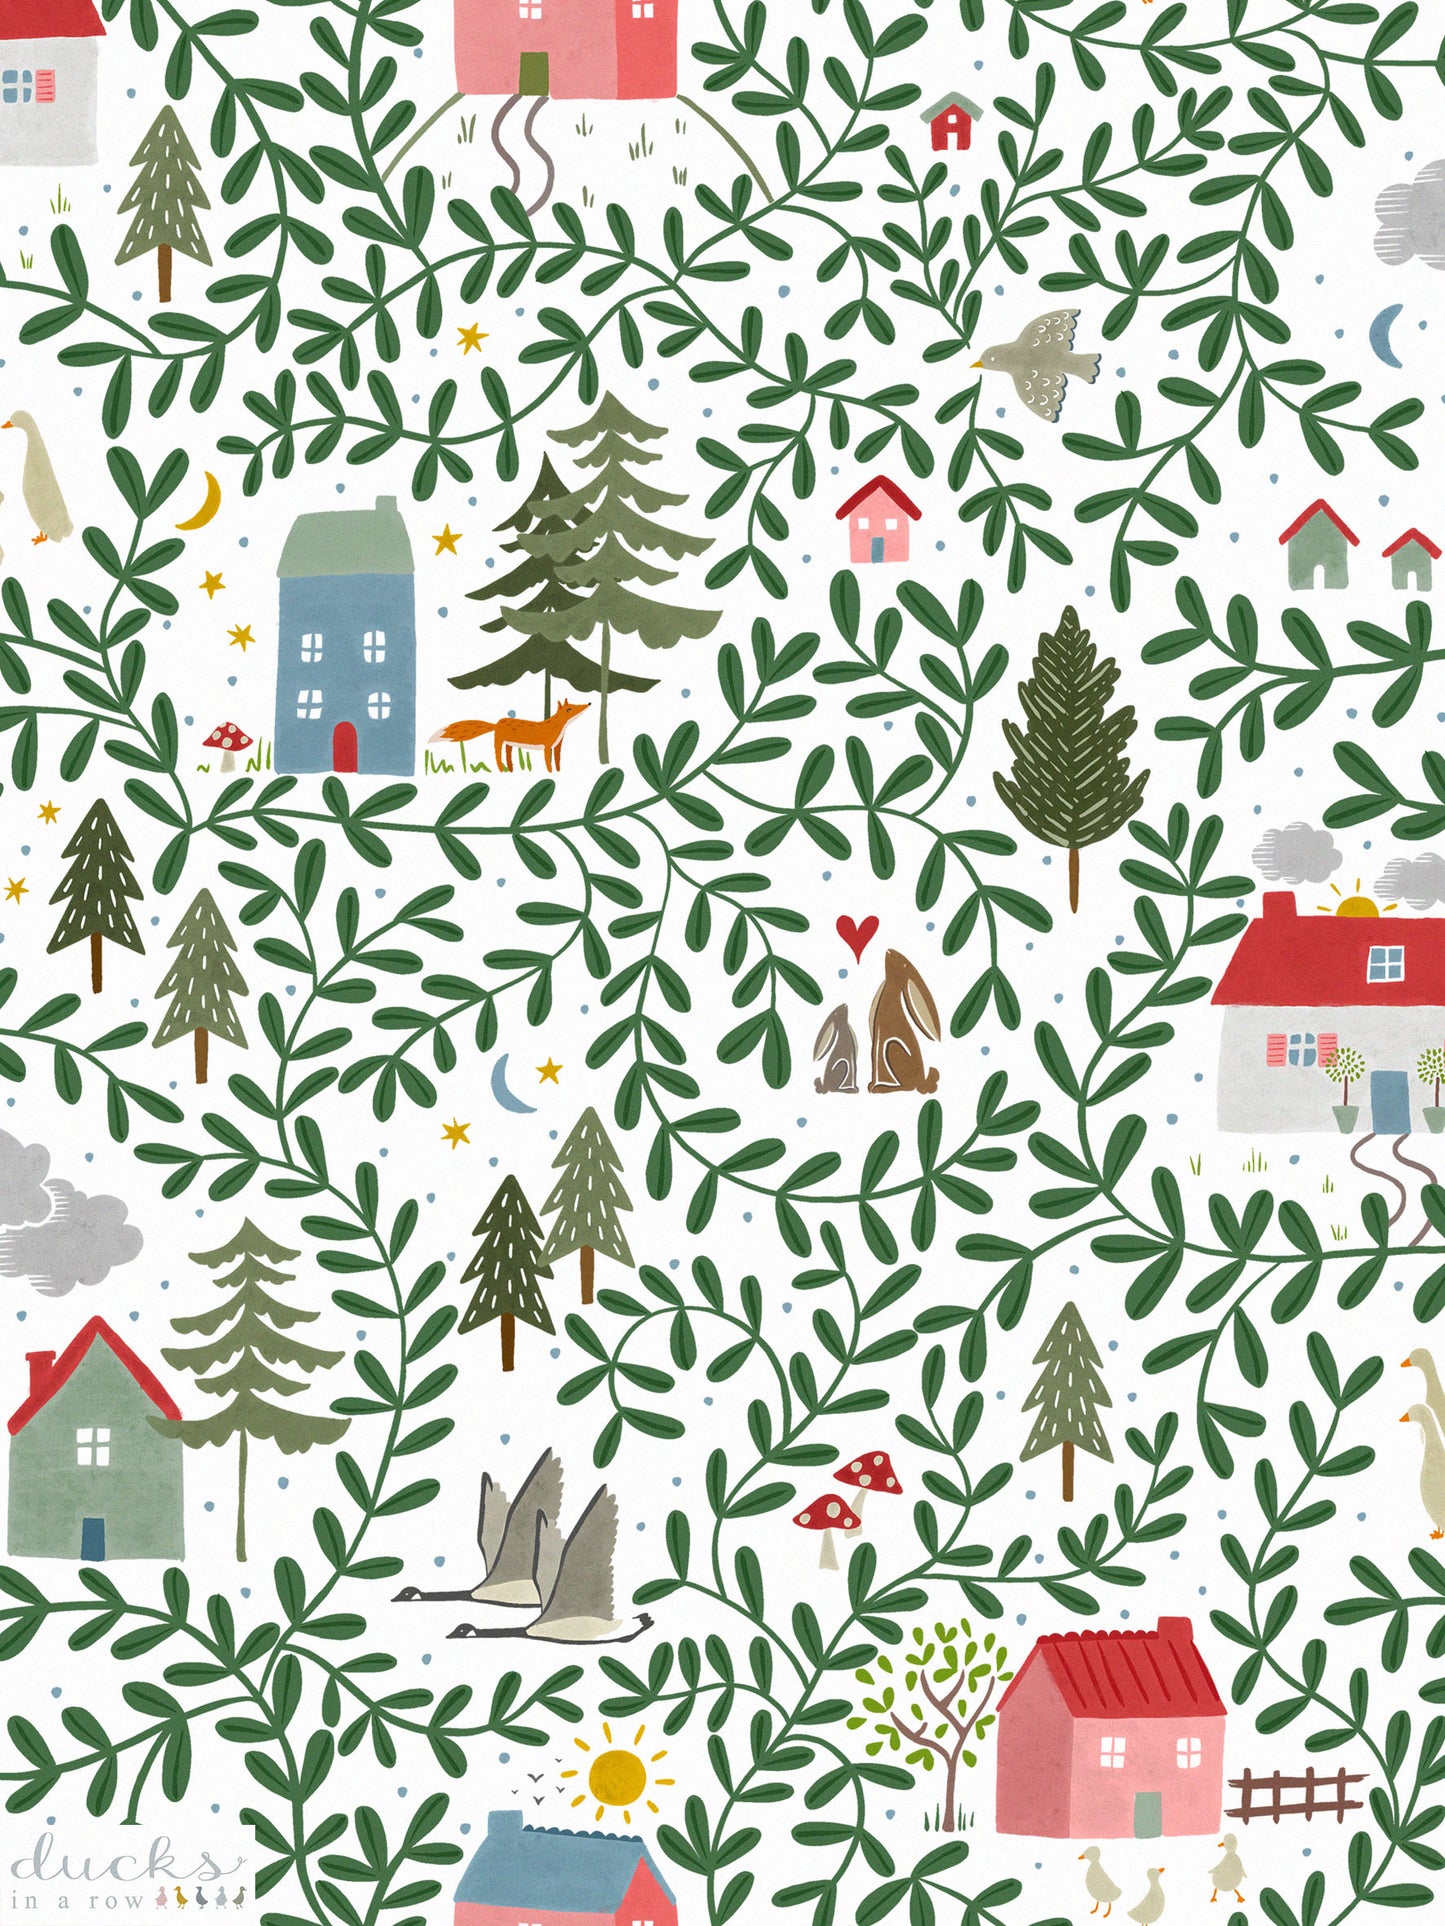 Children's luxury wallpaper with English country cottages, Woodland animals, Trees